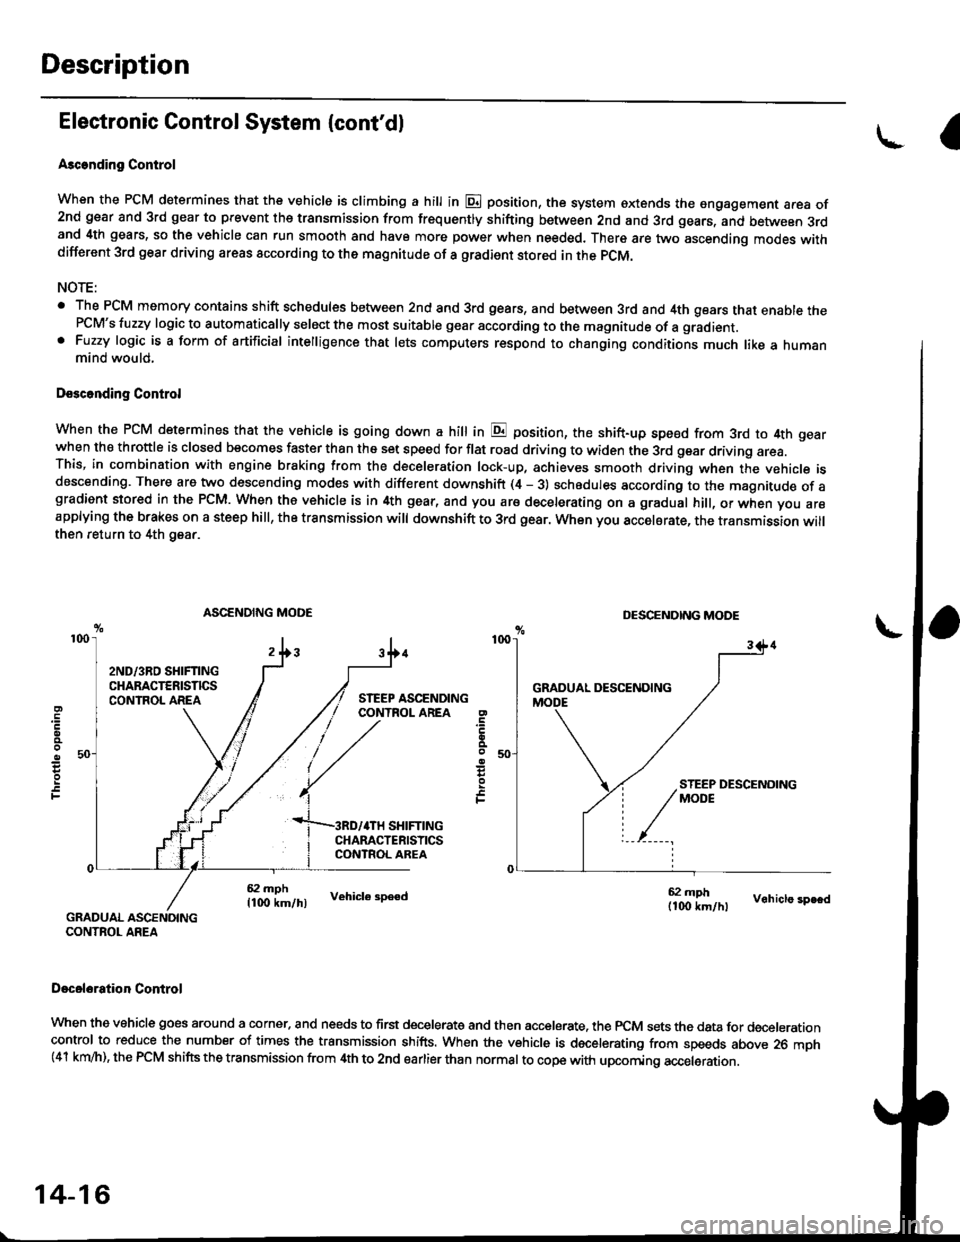 HONDA CIVIC 1997 6.G Service Manual Description
Electronic Control System {contdl
Ascending Control
When the PCM determines that the vehicle is climbing a hill in E position, the system oxtends the sngagement area of2nd gear and 3rd ge